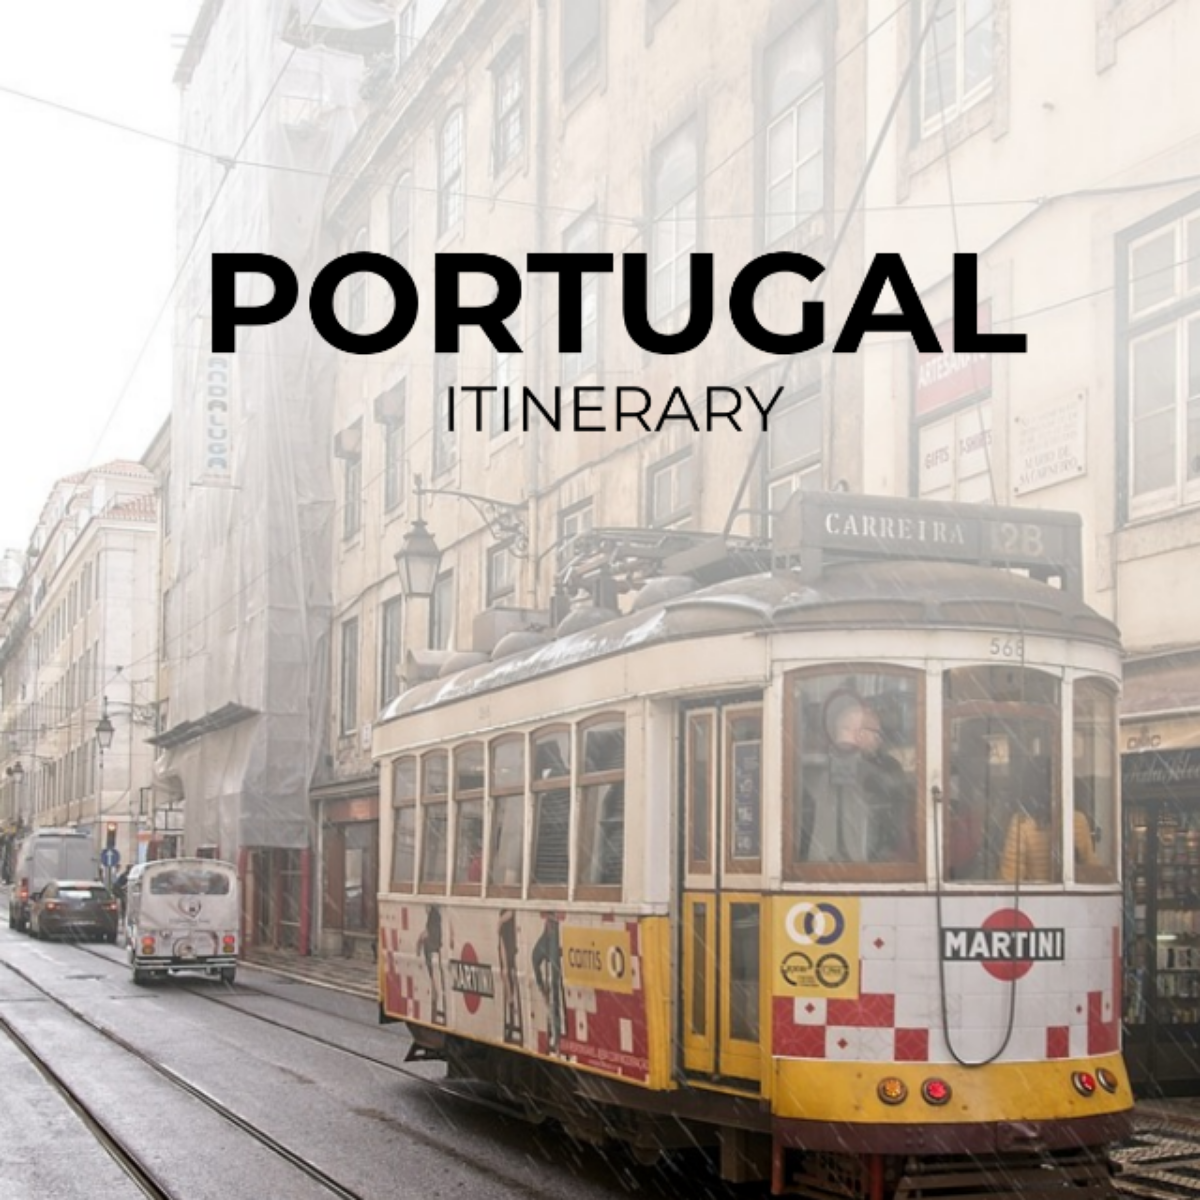 Portugal Itinerary Template